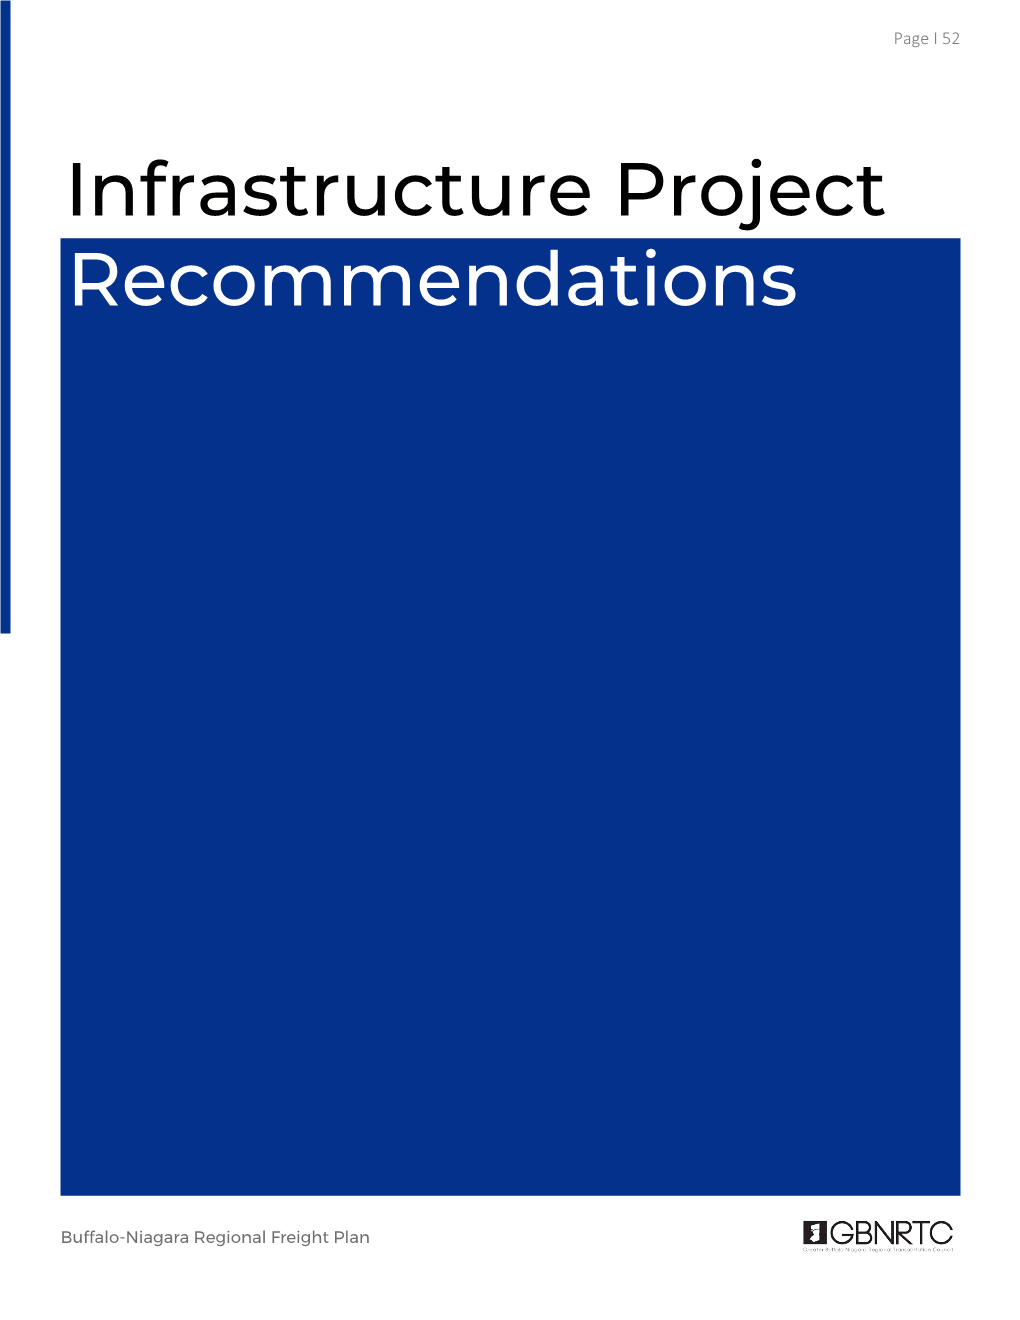 Infrastructure Project Sheets